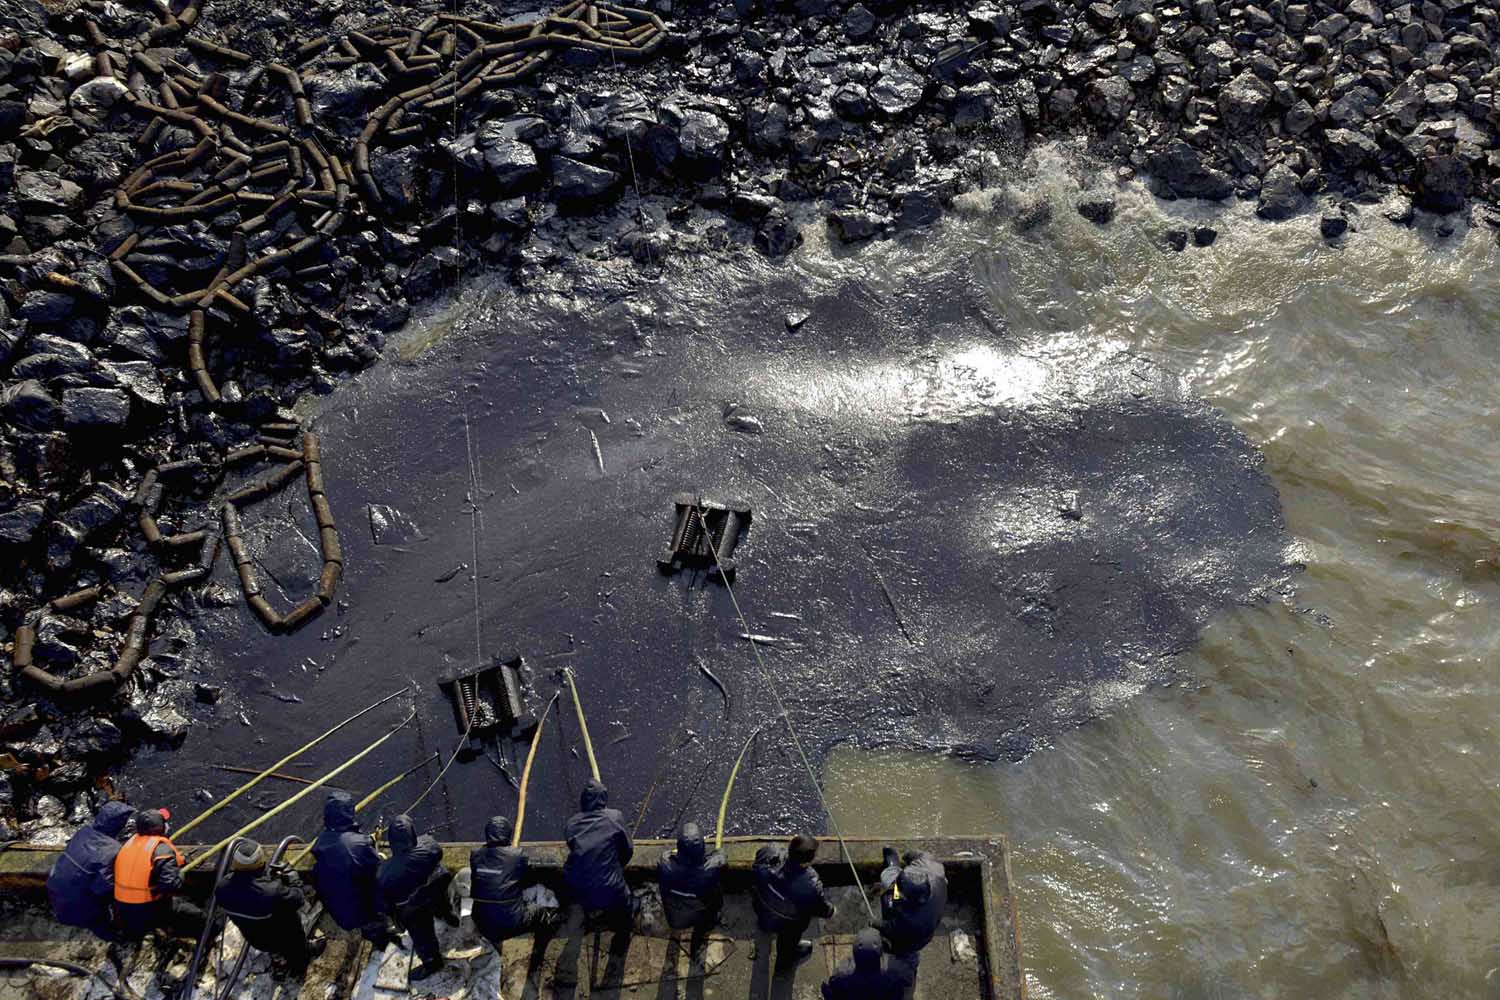 Workers clean up leaked oil after an oil pipeline explosion last week in Qingdao